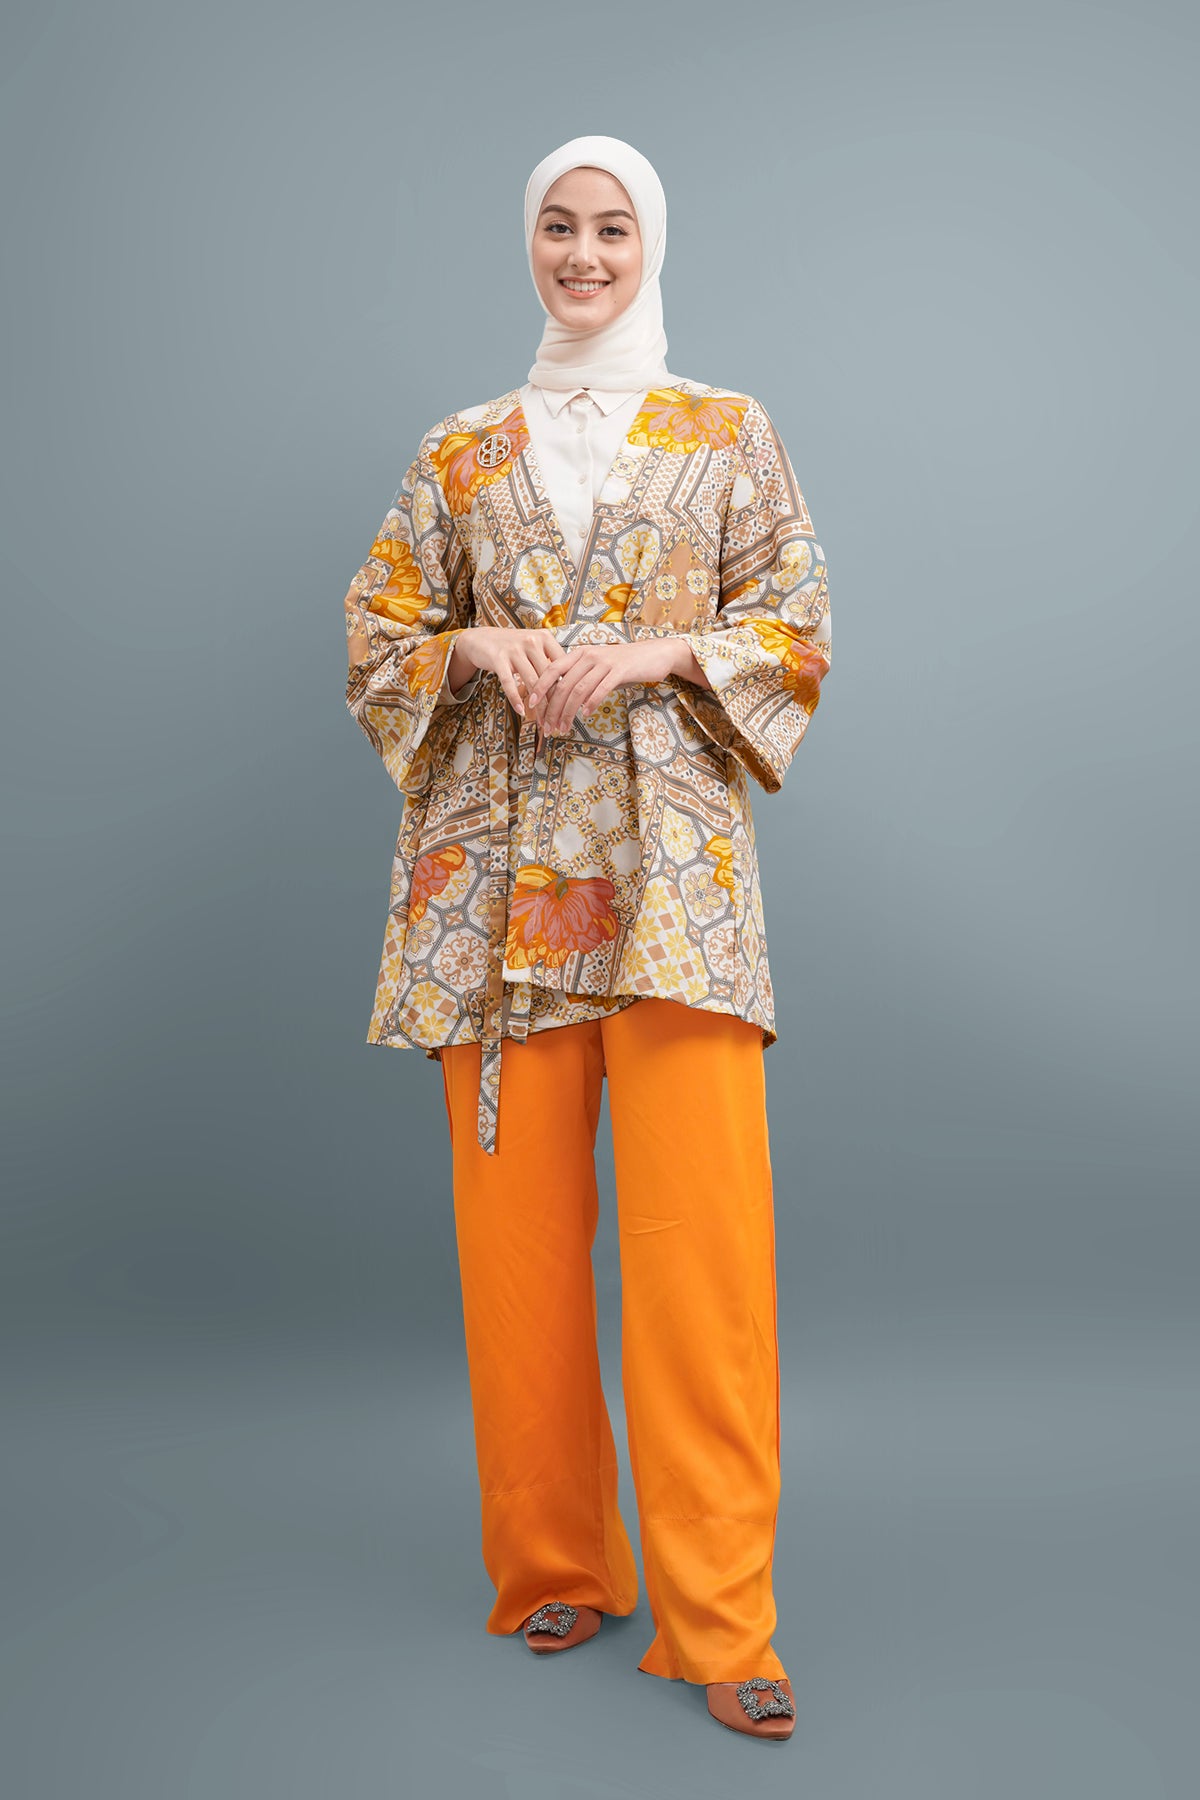 Elena Outer With Tie - Yellow